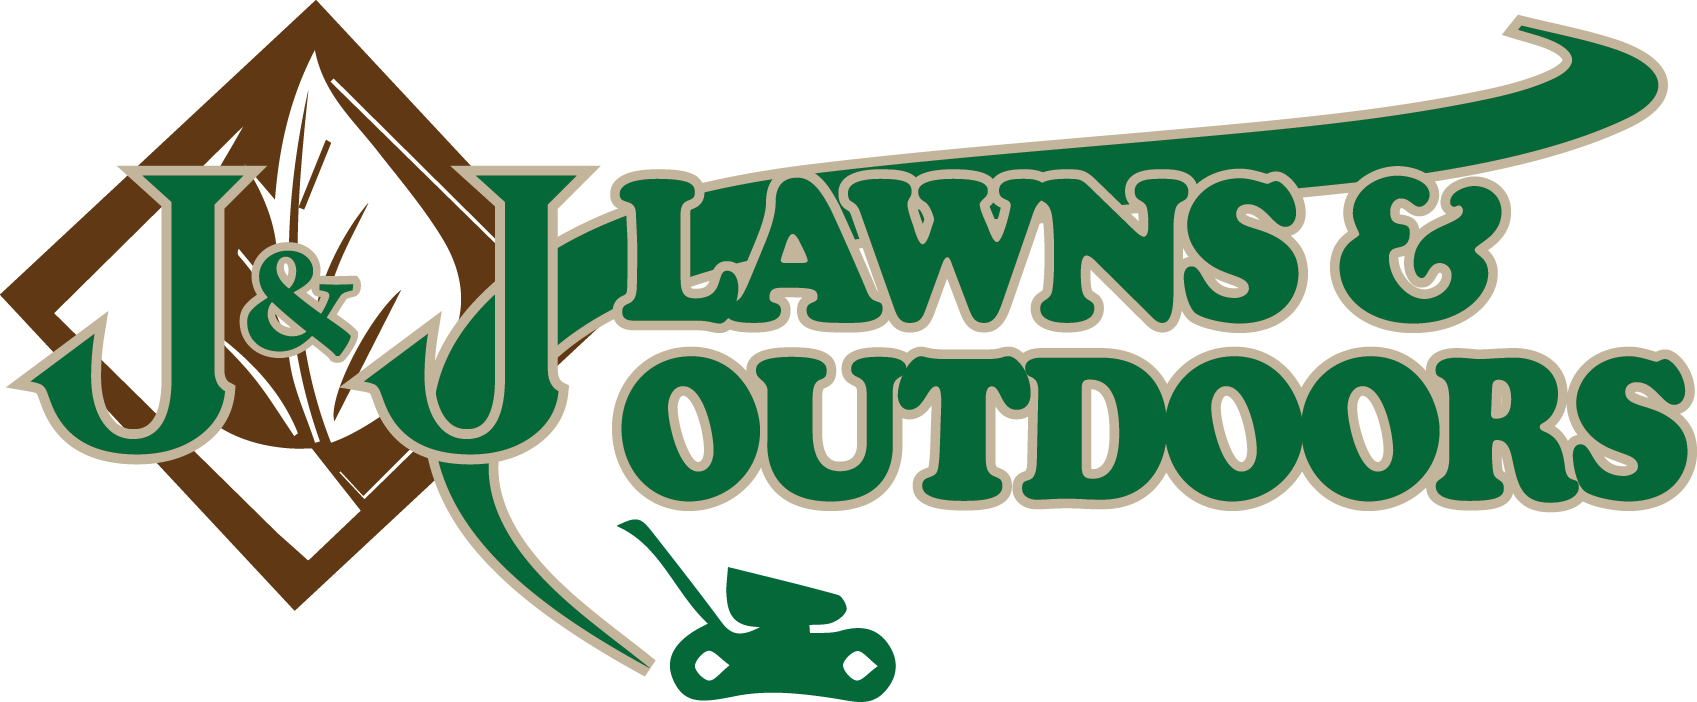 outdoors clipart lawn care logo